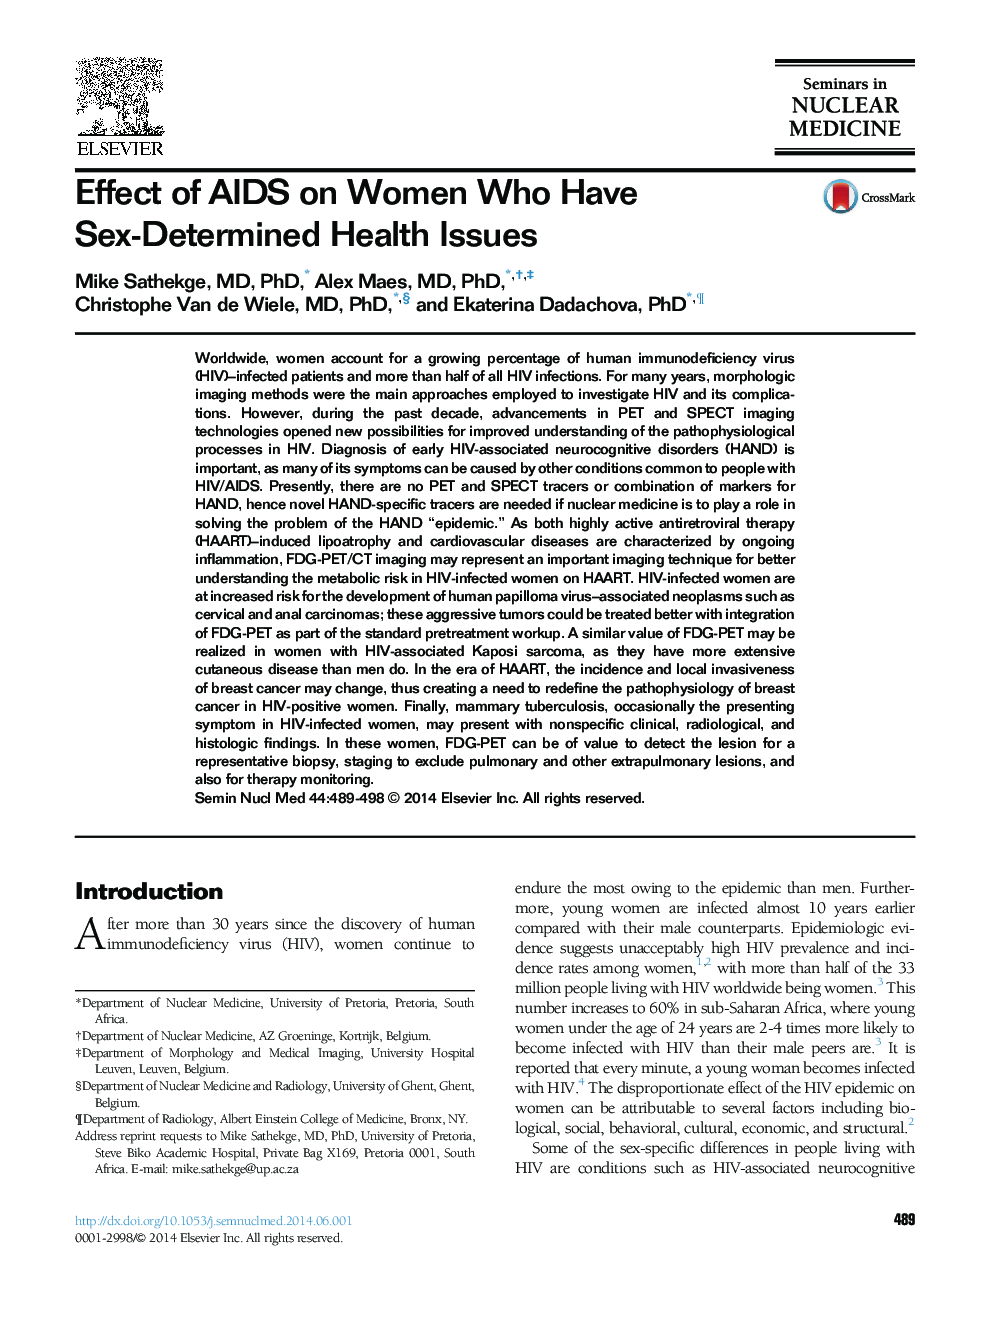 Effect of AIDS on Women Who Have Sex-Determined Health Issues